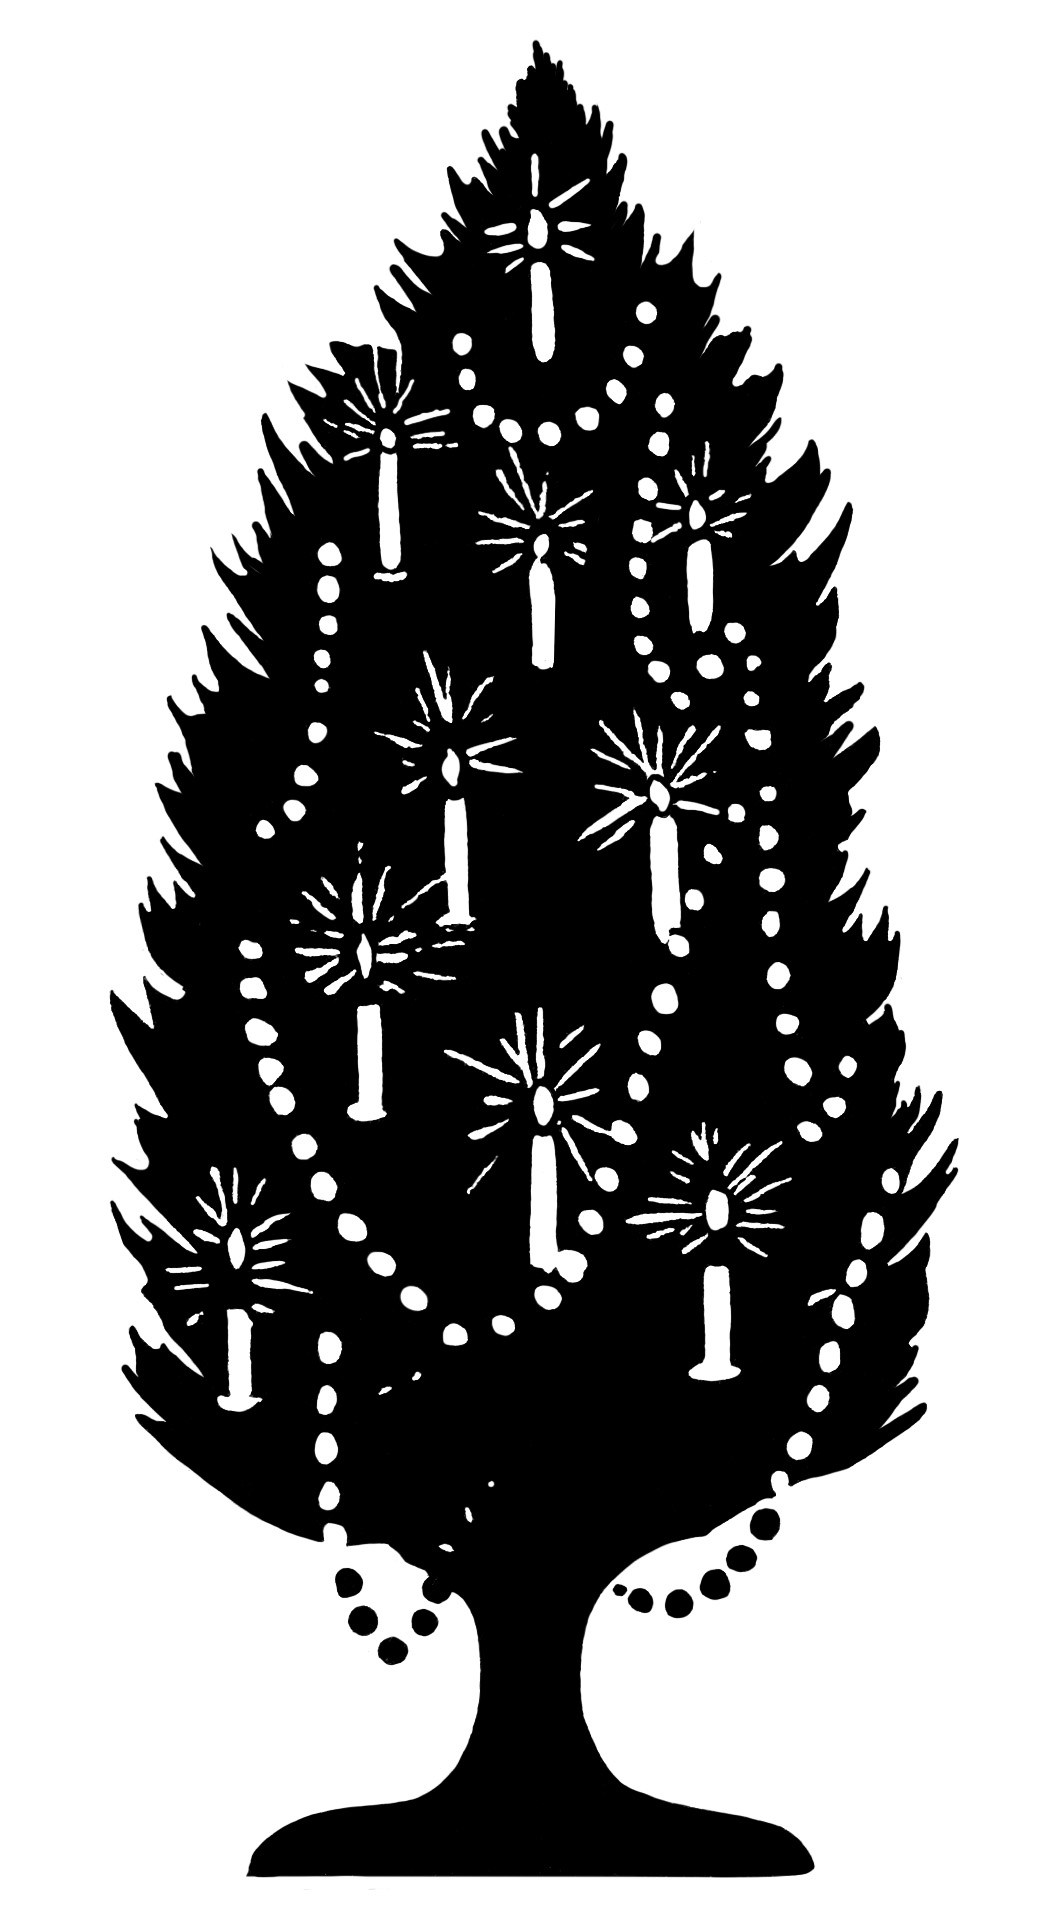 Here Is A Fun Clip Art Illustration Of A Vintage Christmas Tree That